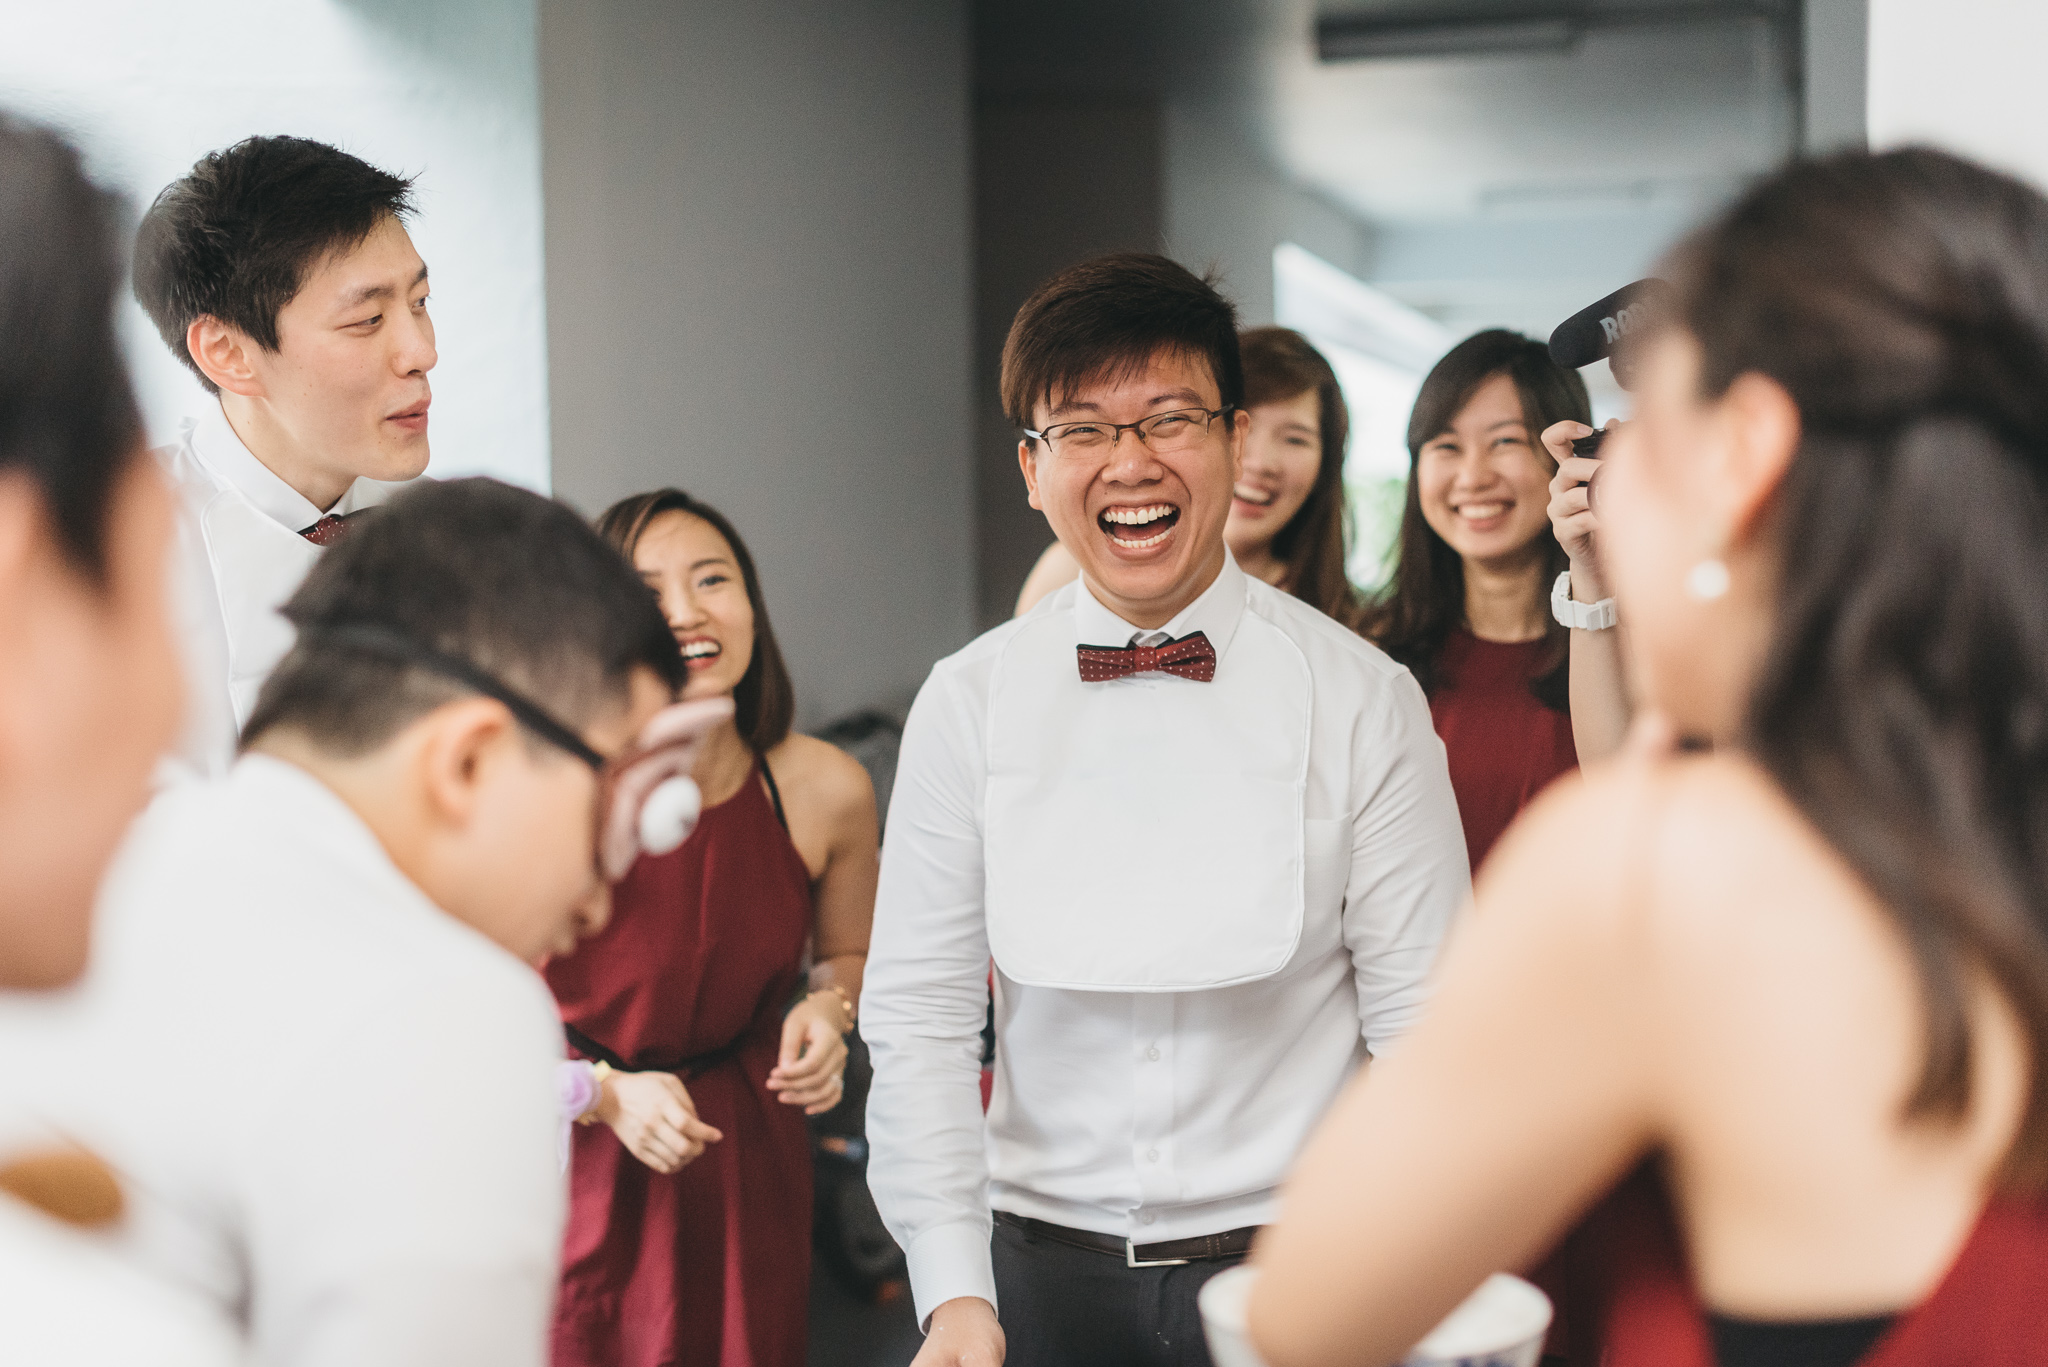 Fiona & Terence Wedding Day Highlights (resized for sharing) - 097.jpg